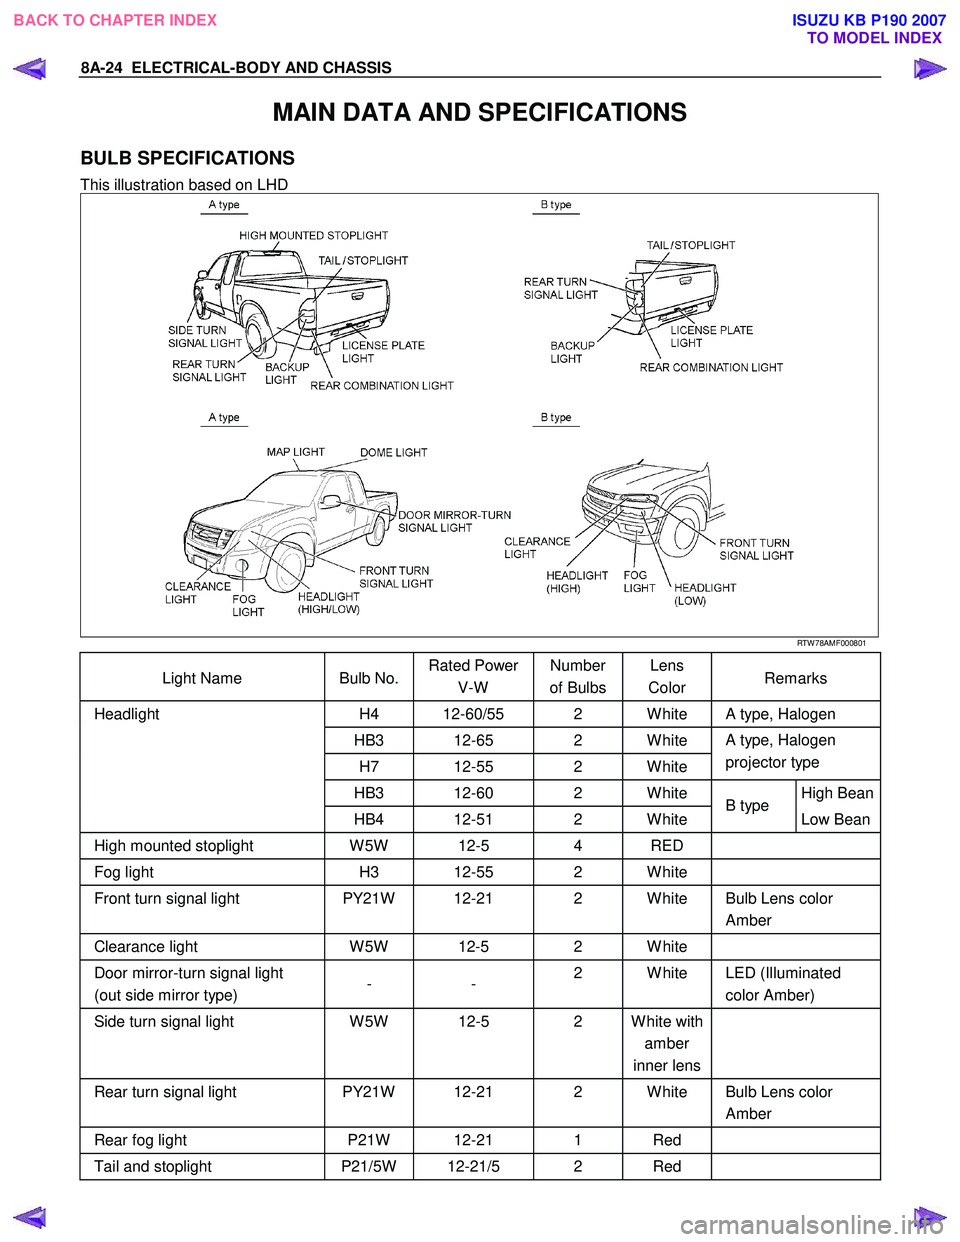 ISUZU KB P190 2007  Workshop Repair Manual 8A-24  ELECTRICAL-BODY AND CHASSIS 
MAIN DATA AND SPECIFICATIONS 
BULB SPECIFICATIONS 
This illustration based on LHD  
  
   RTW 78AMF000801 
Light Name   Bulb No. Rated Power 
V-W   Number 
of Bulbs